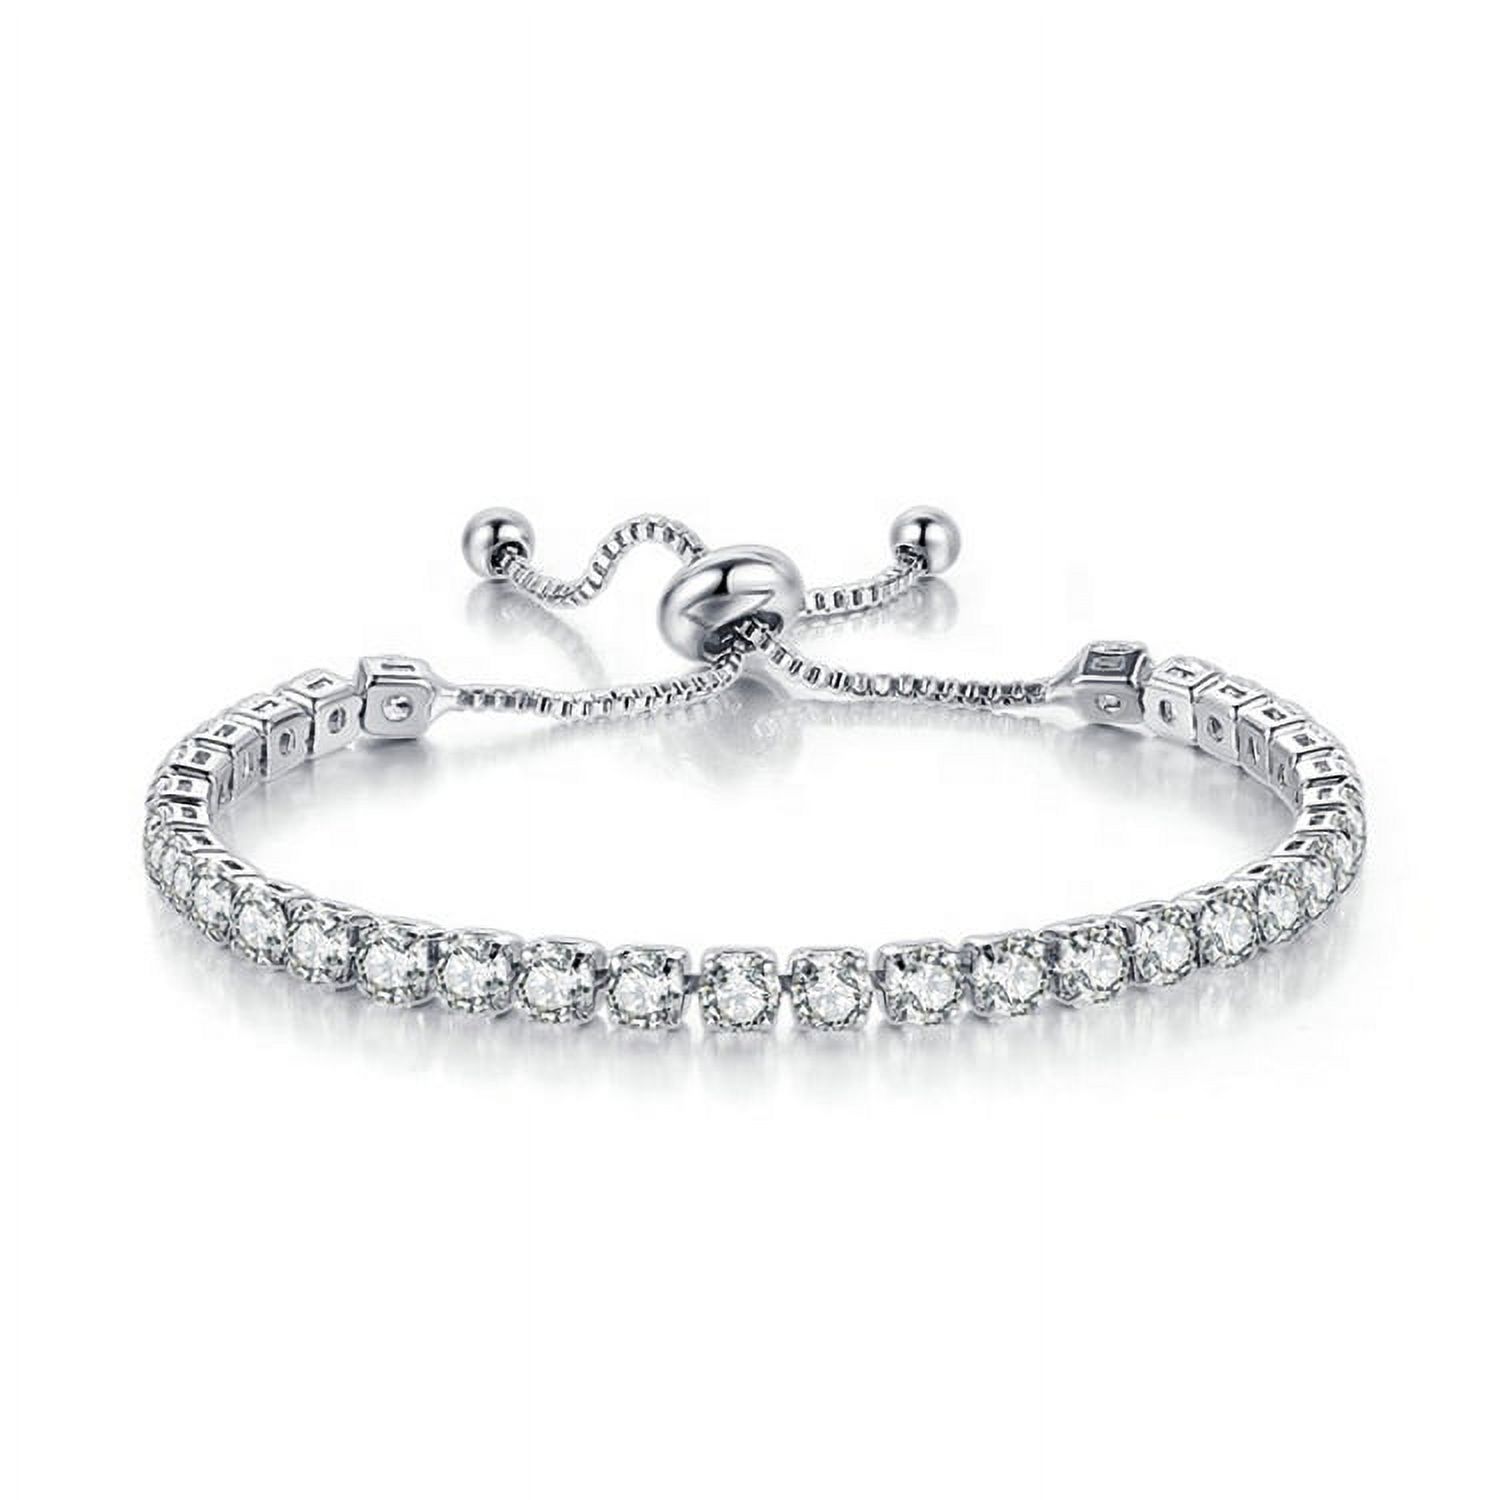 Paris Jewelry 18k White Gold 6 Cttw Created White Sapphire Round Adjustable Tennis Plated Bracelet , Female - image 1 of 5